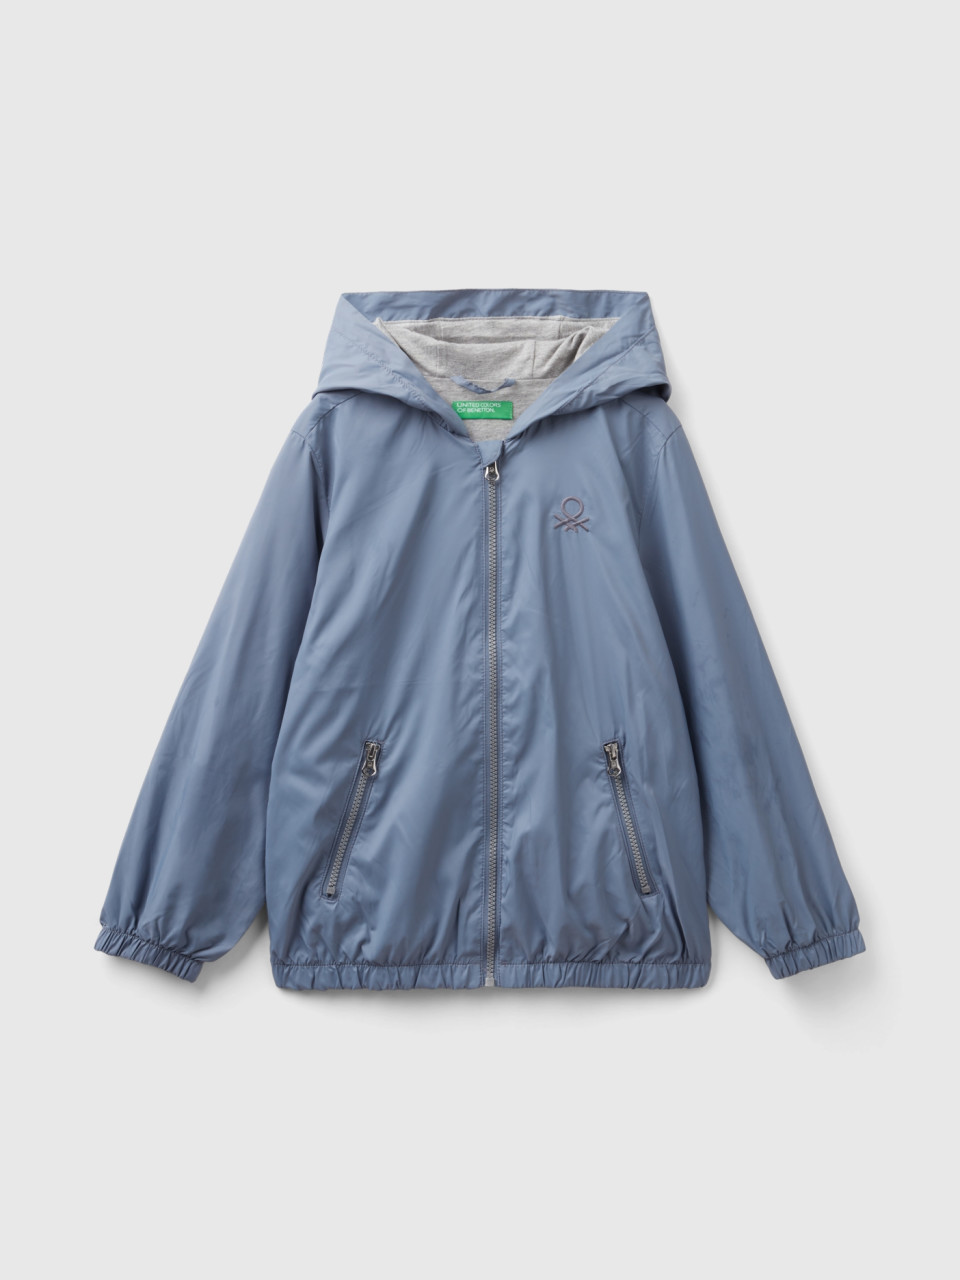 Benetton, Nylon Jacket With Hood, Air Force Blue, Kids